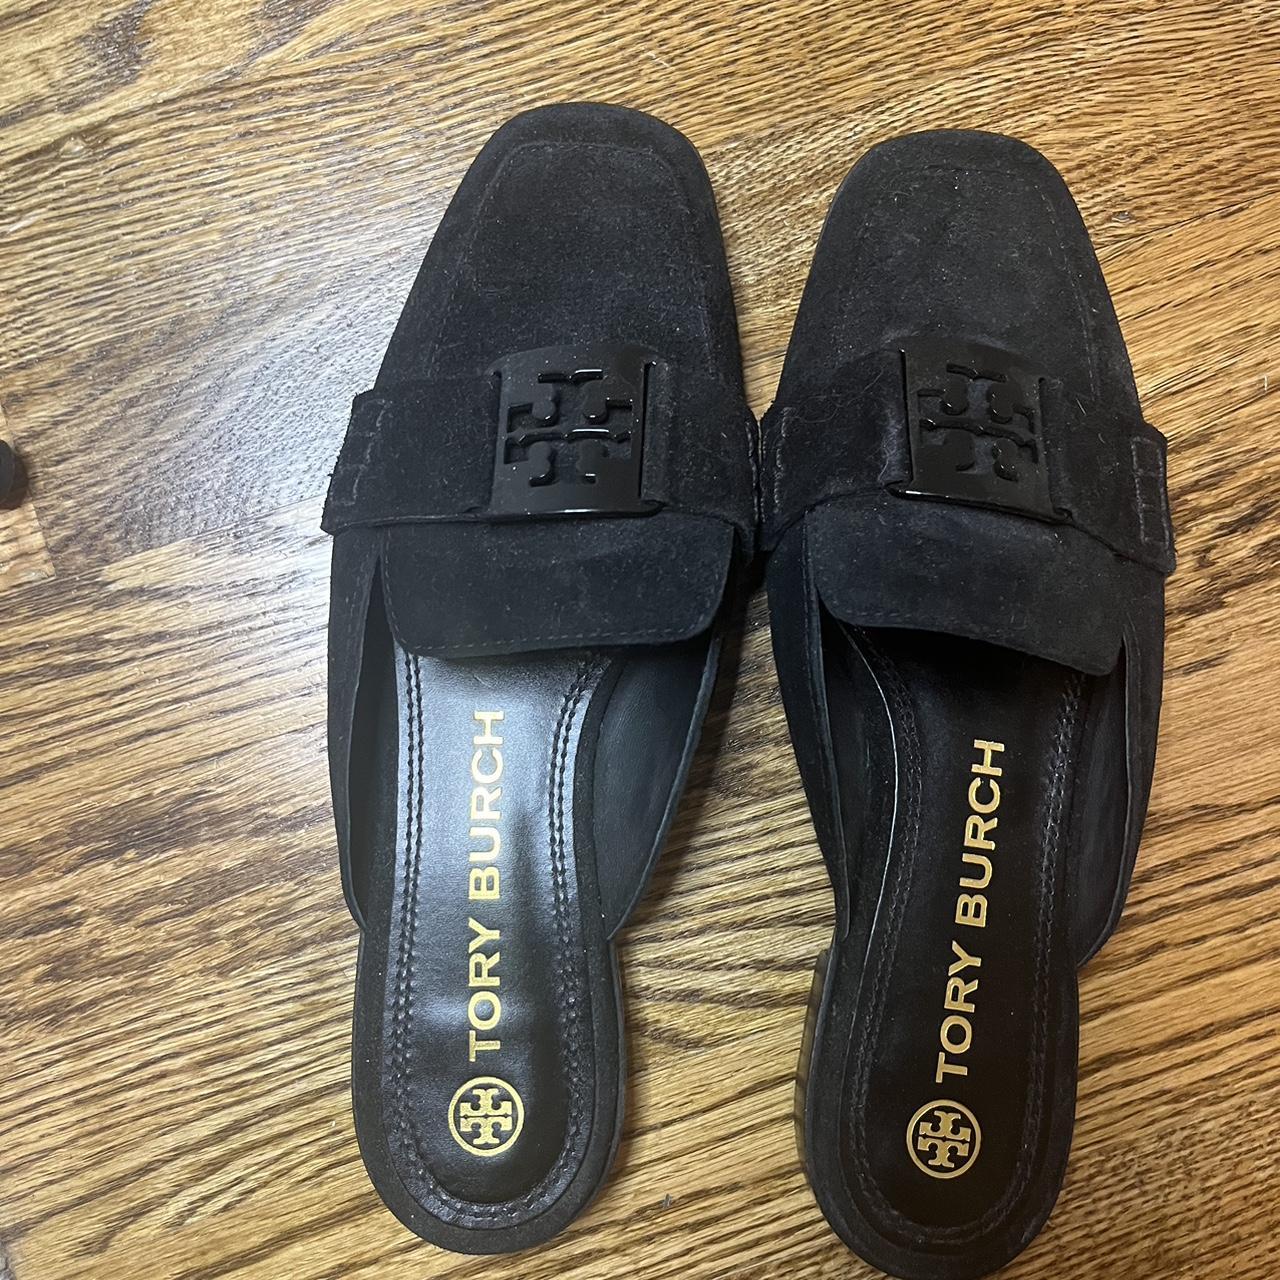 Tory Burch, Shoes, Tory Burch Sandals Size 7